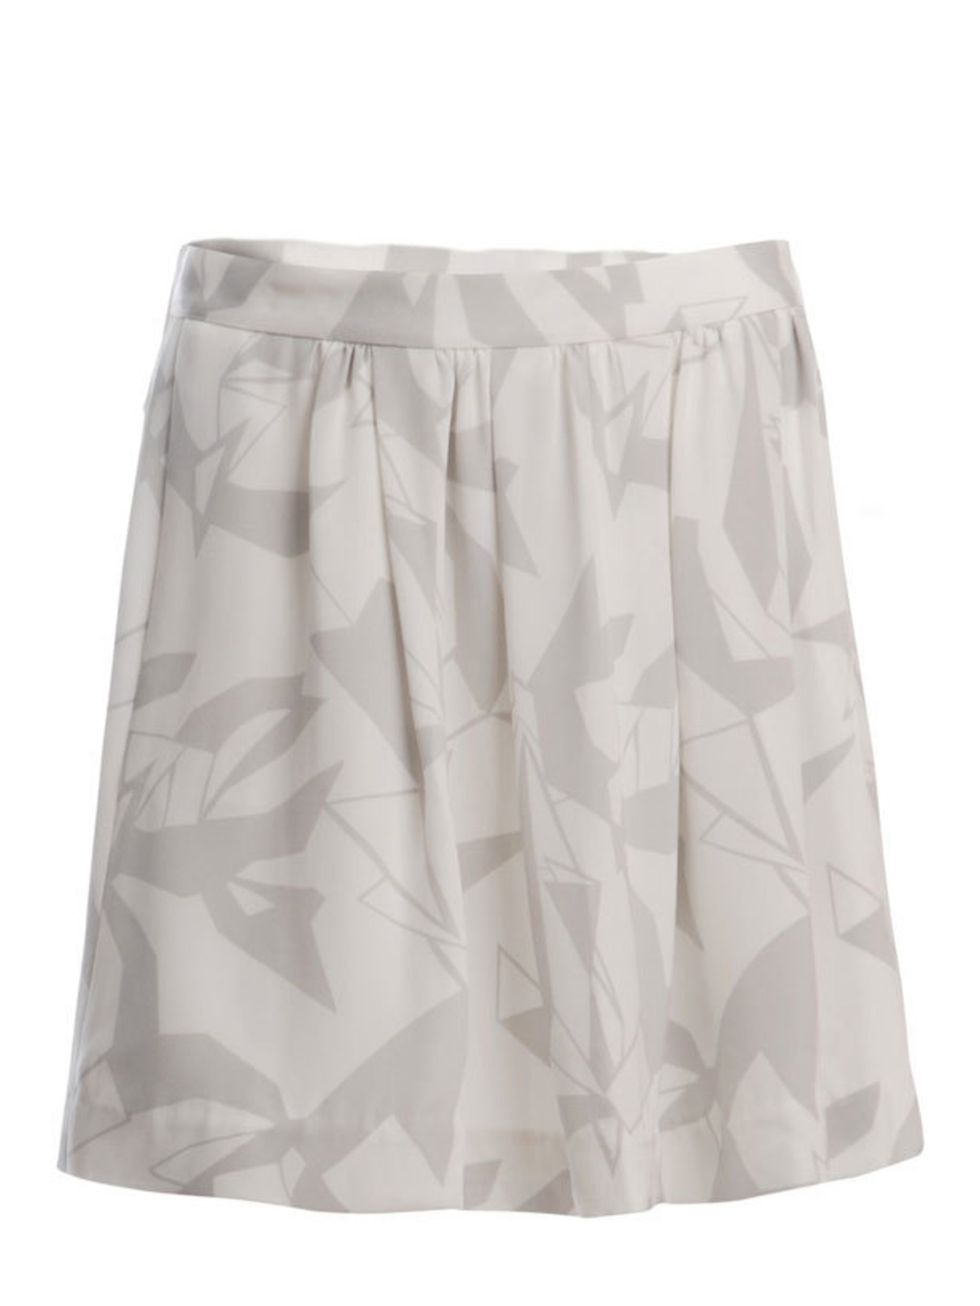 <p>White printed skirt, £295, by Freda at M<a href="http://www.matchesfashion.com/fcp/product/Matches-Fashion//freda-freda-x-sk081-amber-skirts-WHITE/25648">atches</a></p>